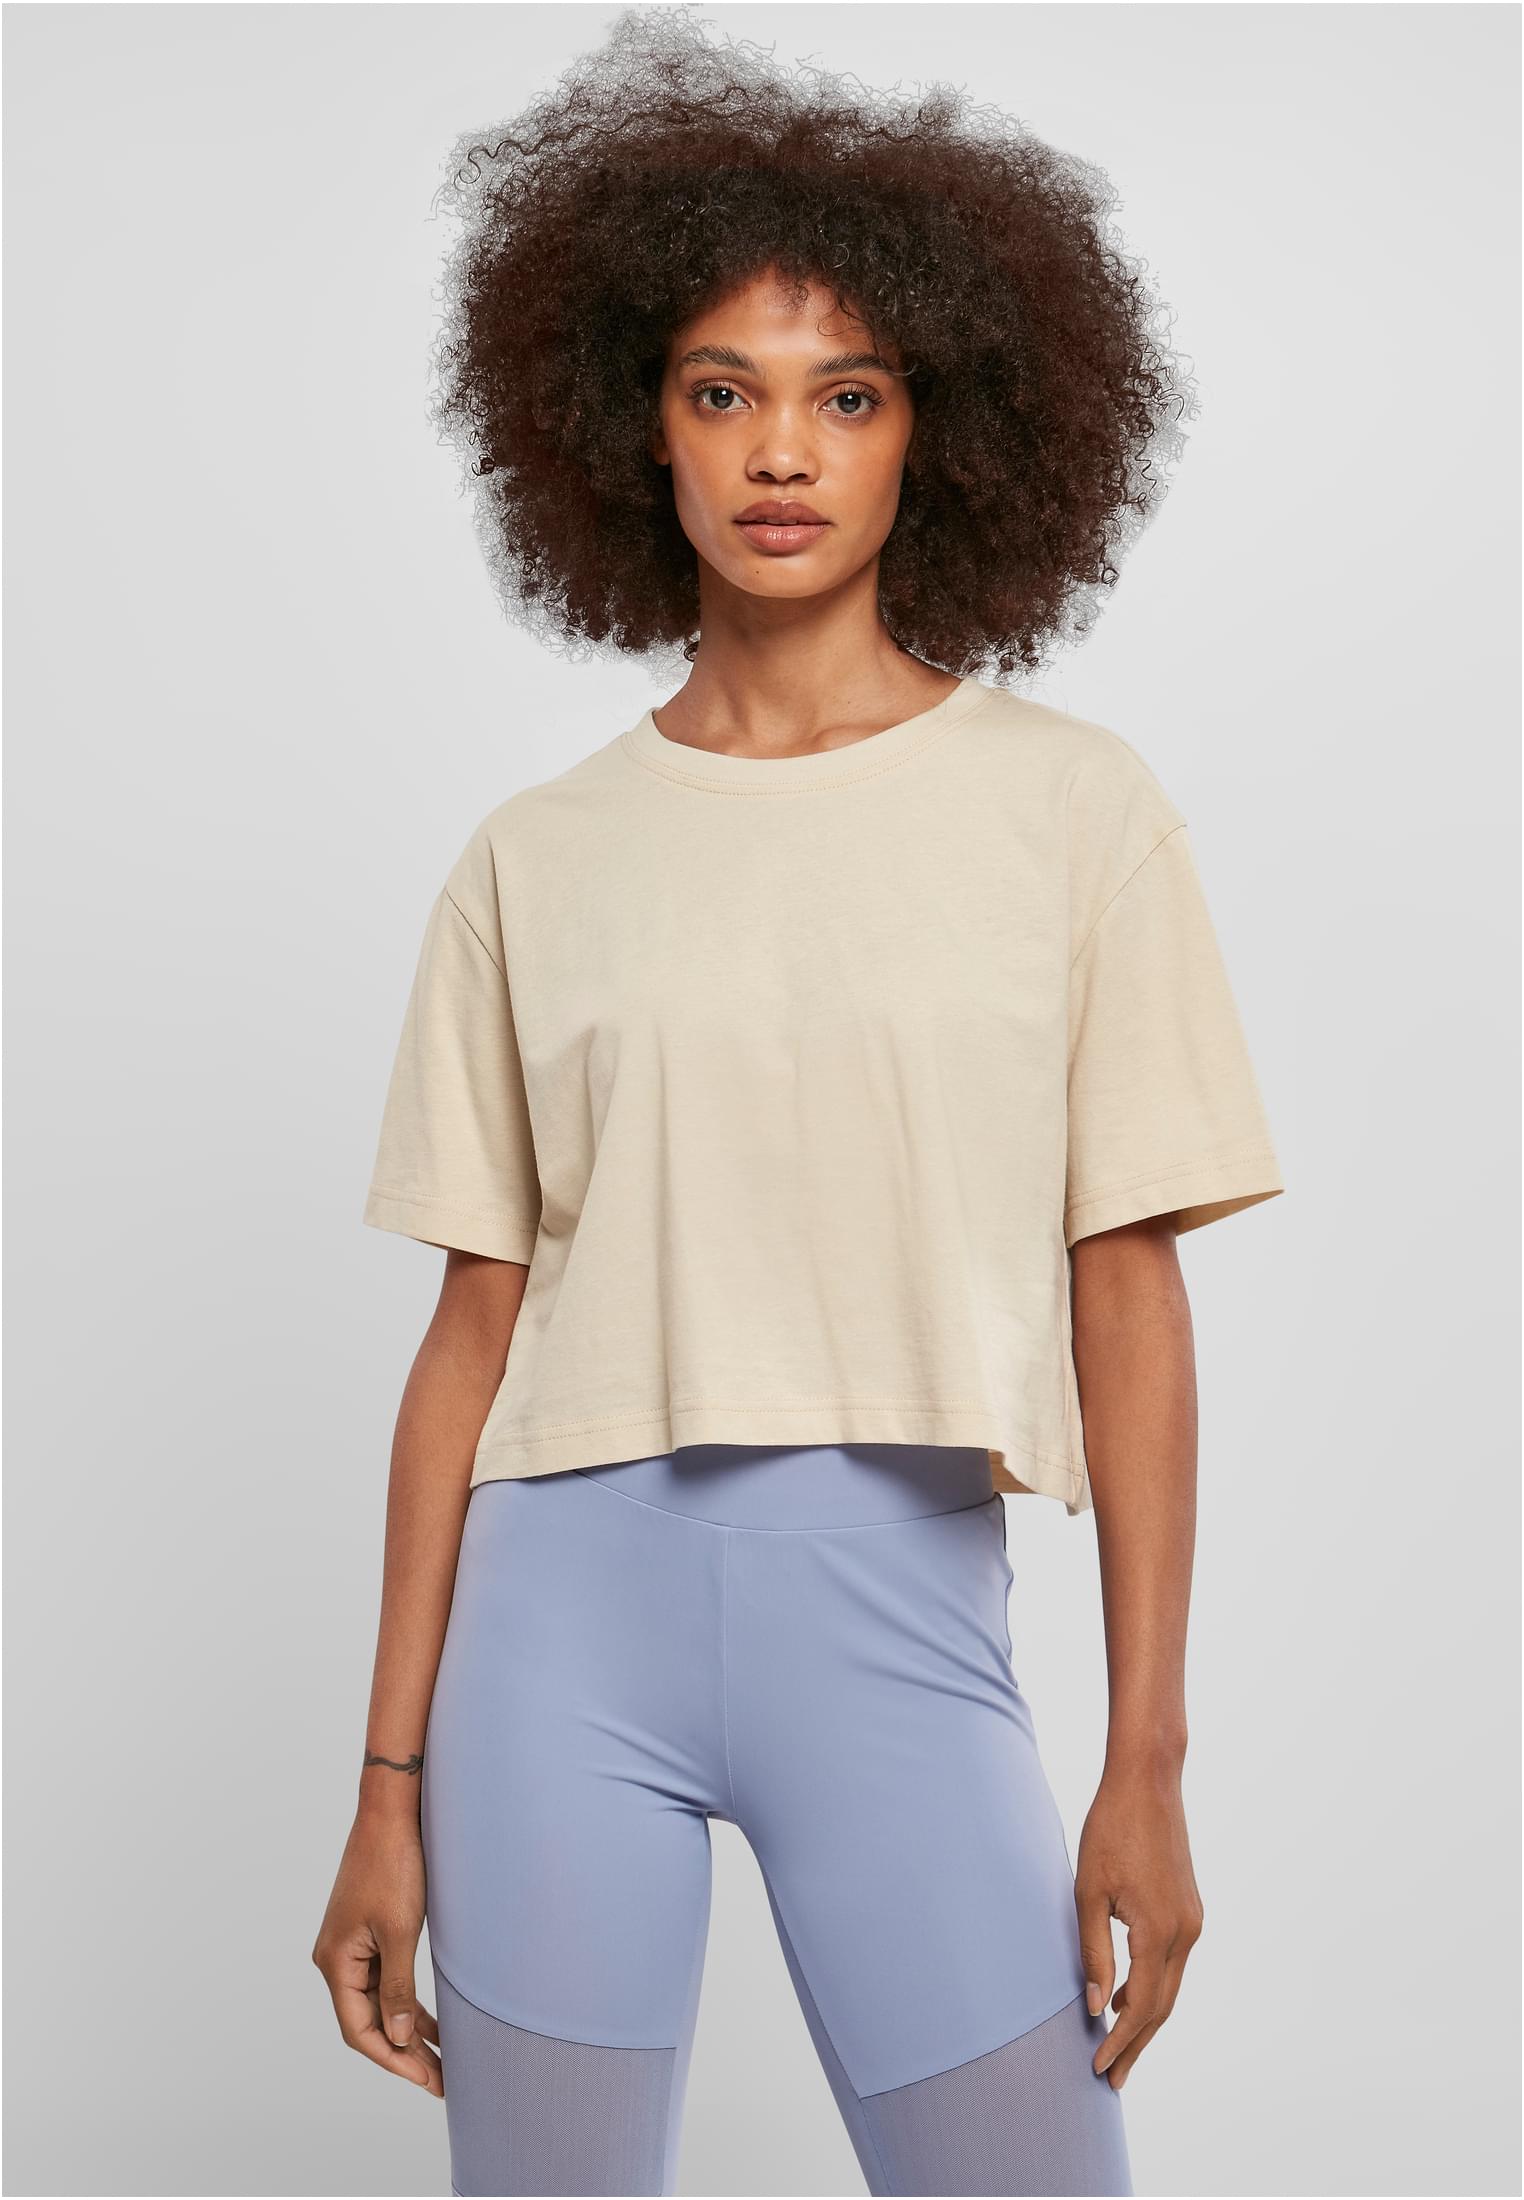 Women's Short Oversized T-shirt From The Soft Sea